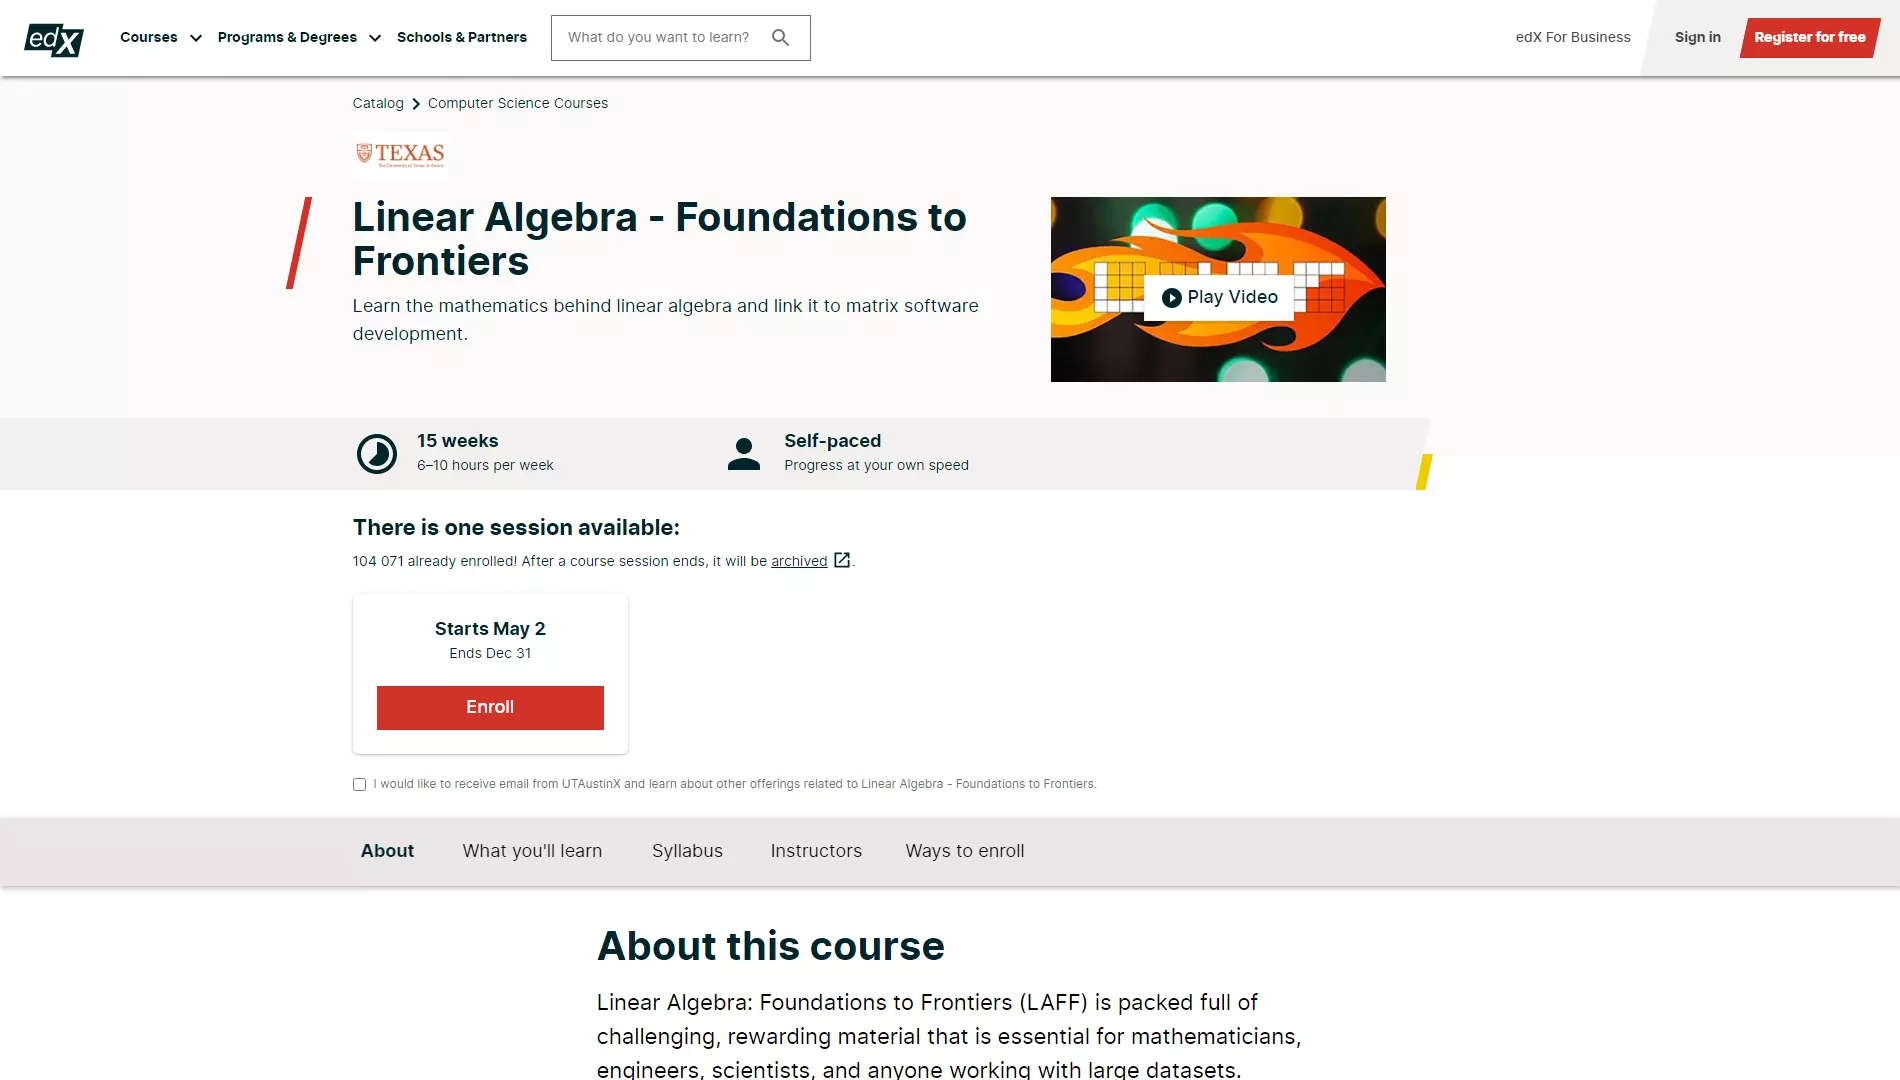 Linear Algebra: Foundations to Frontiers (LAFF) - The University of Texas at Austin